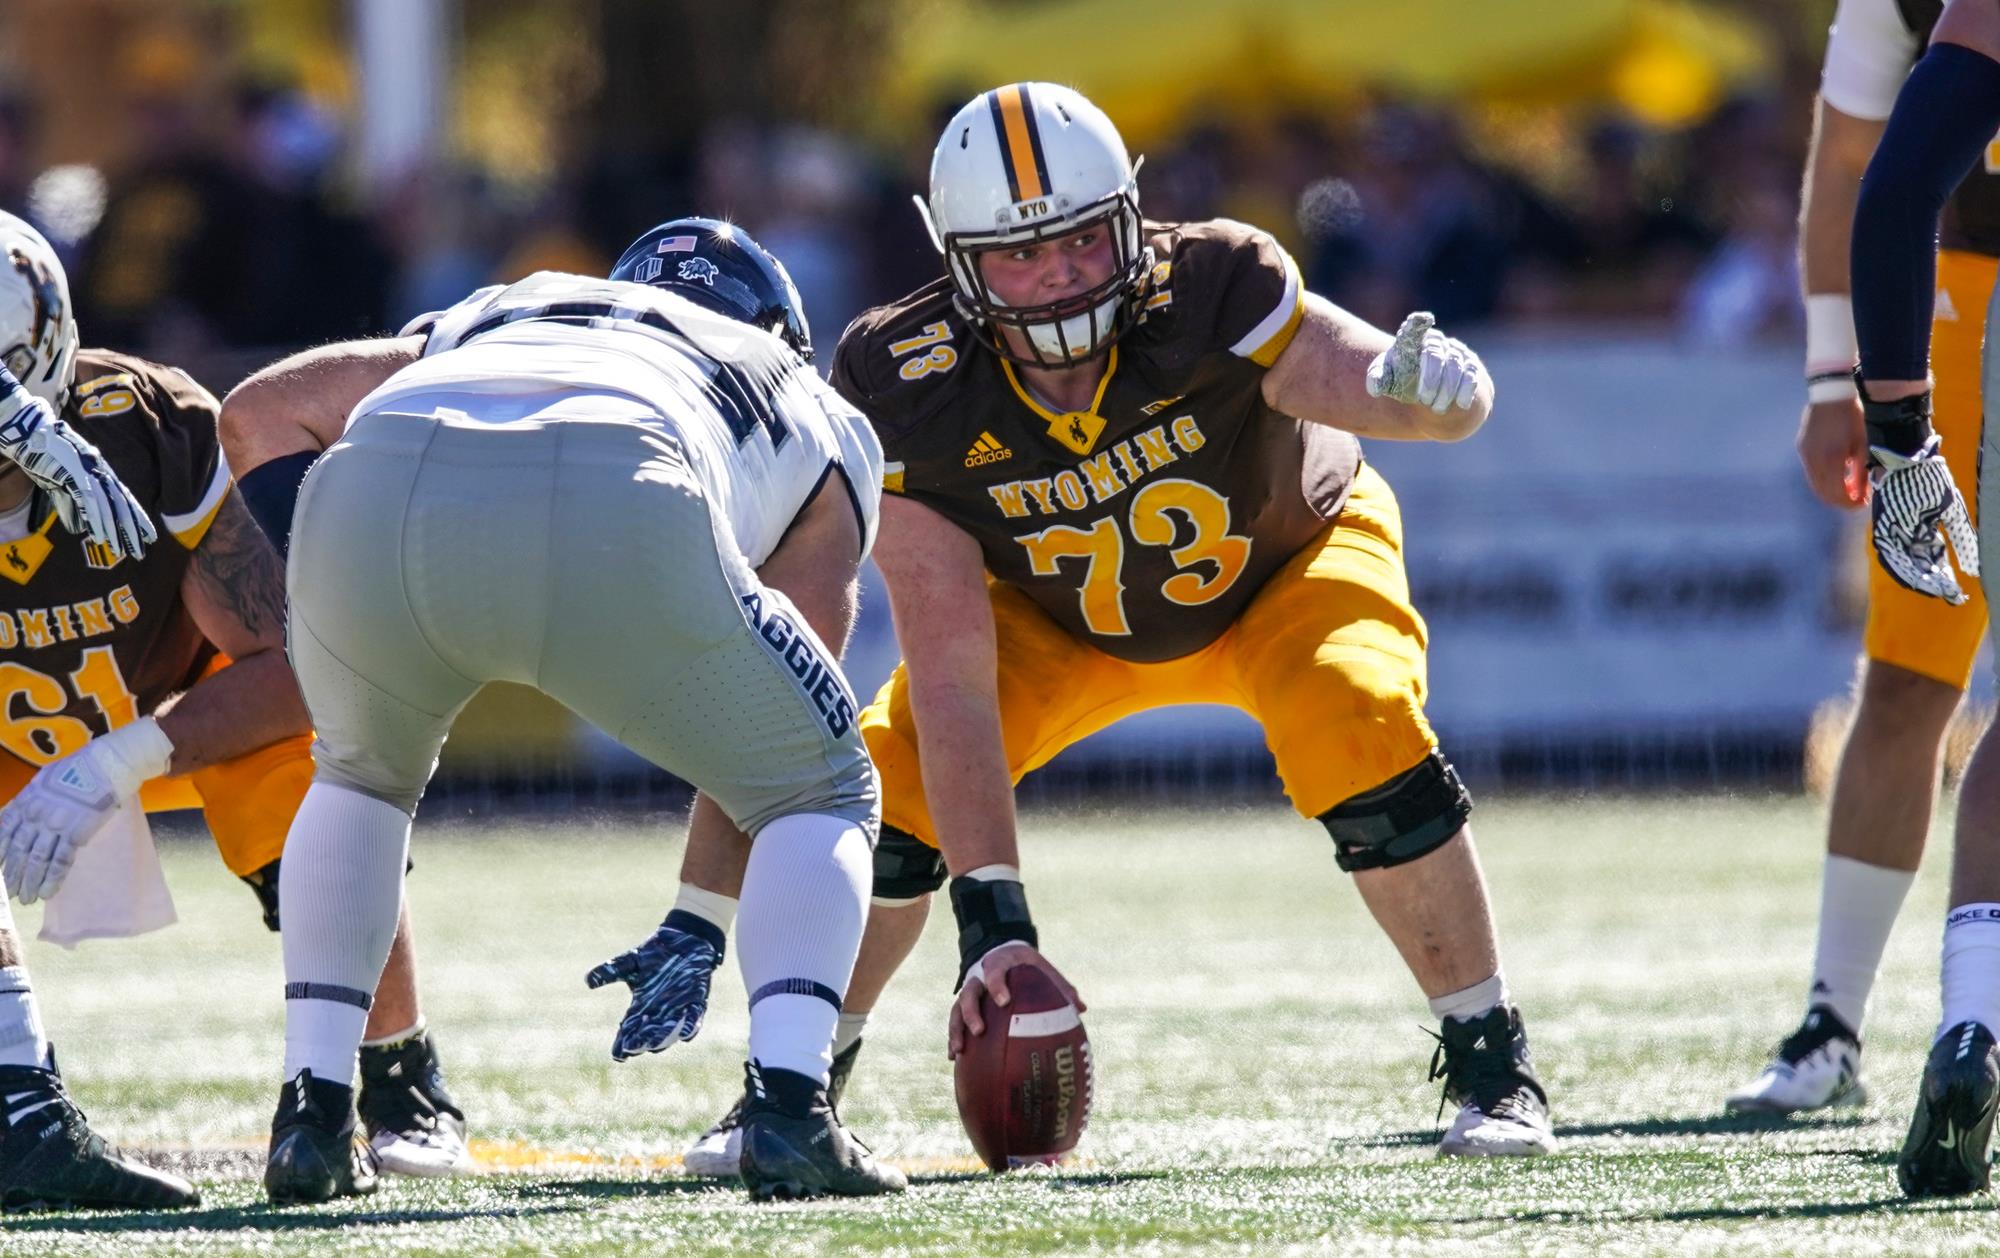 Keegan Cryder the starting anchor of the University of Wyoming's offensive line recently sat down with NFL Draft Diamonds owner Damond Talbot